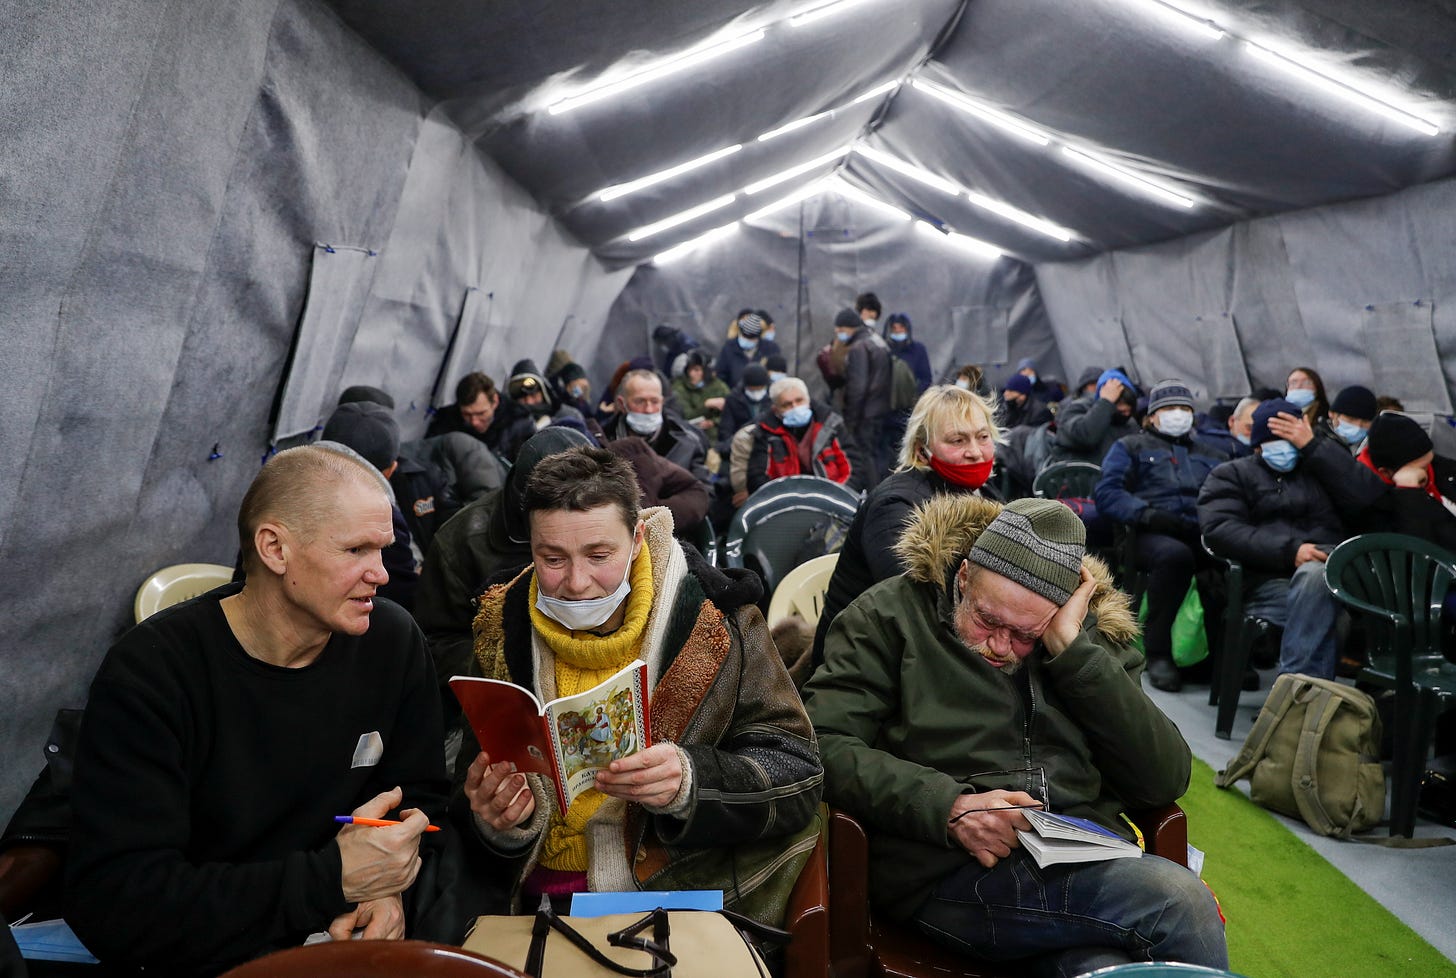 Moscow homeless shelter sees visitors triple in pandemic | Reuters